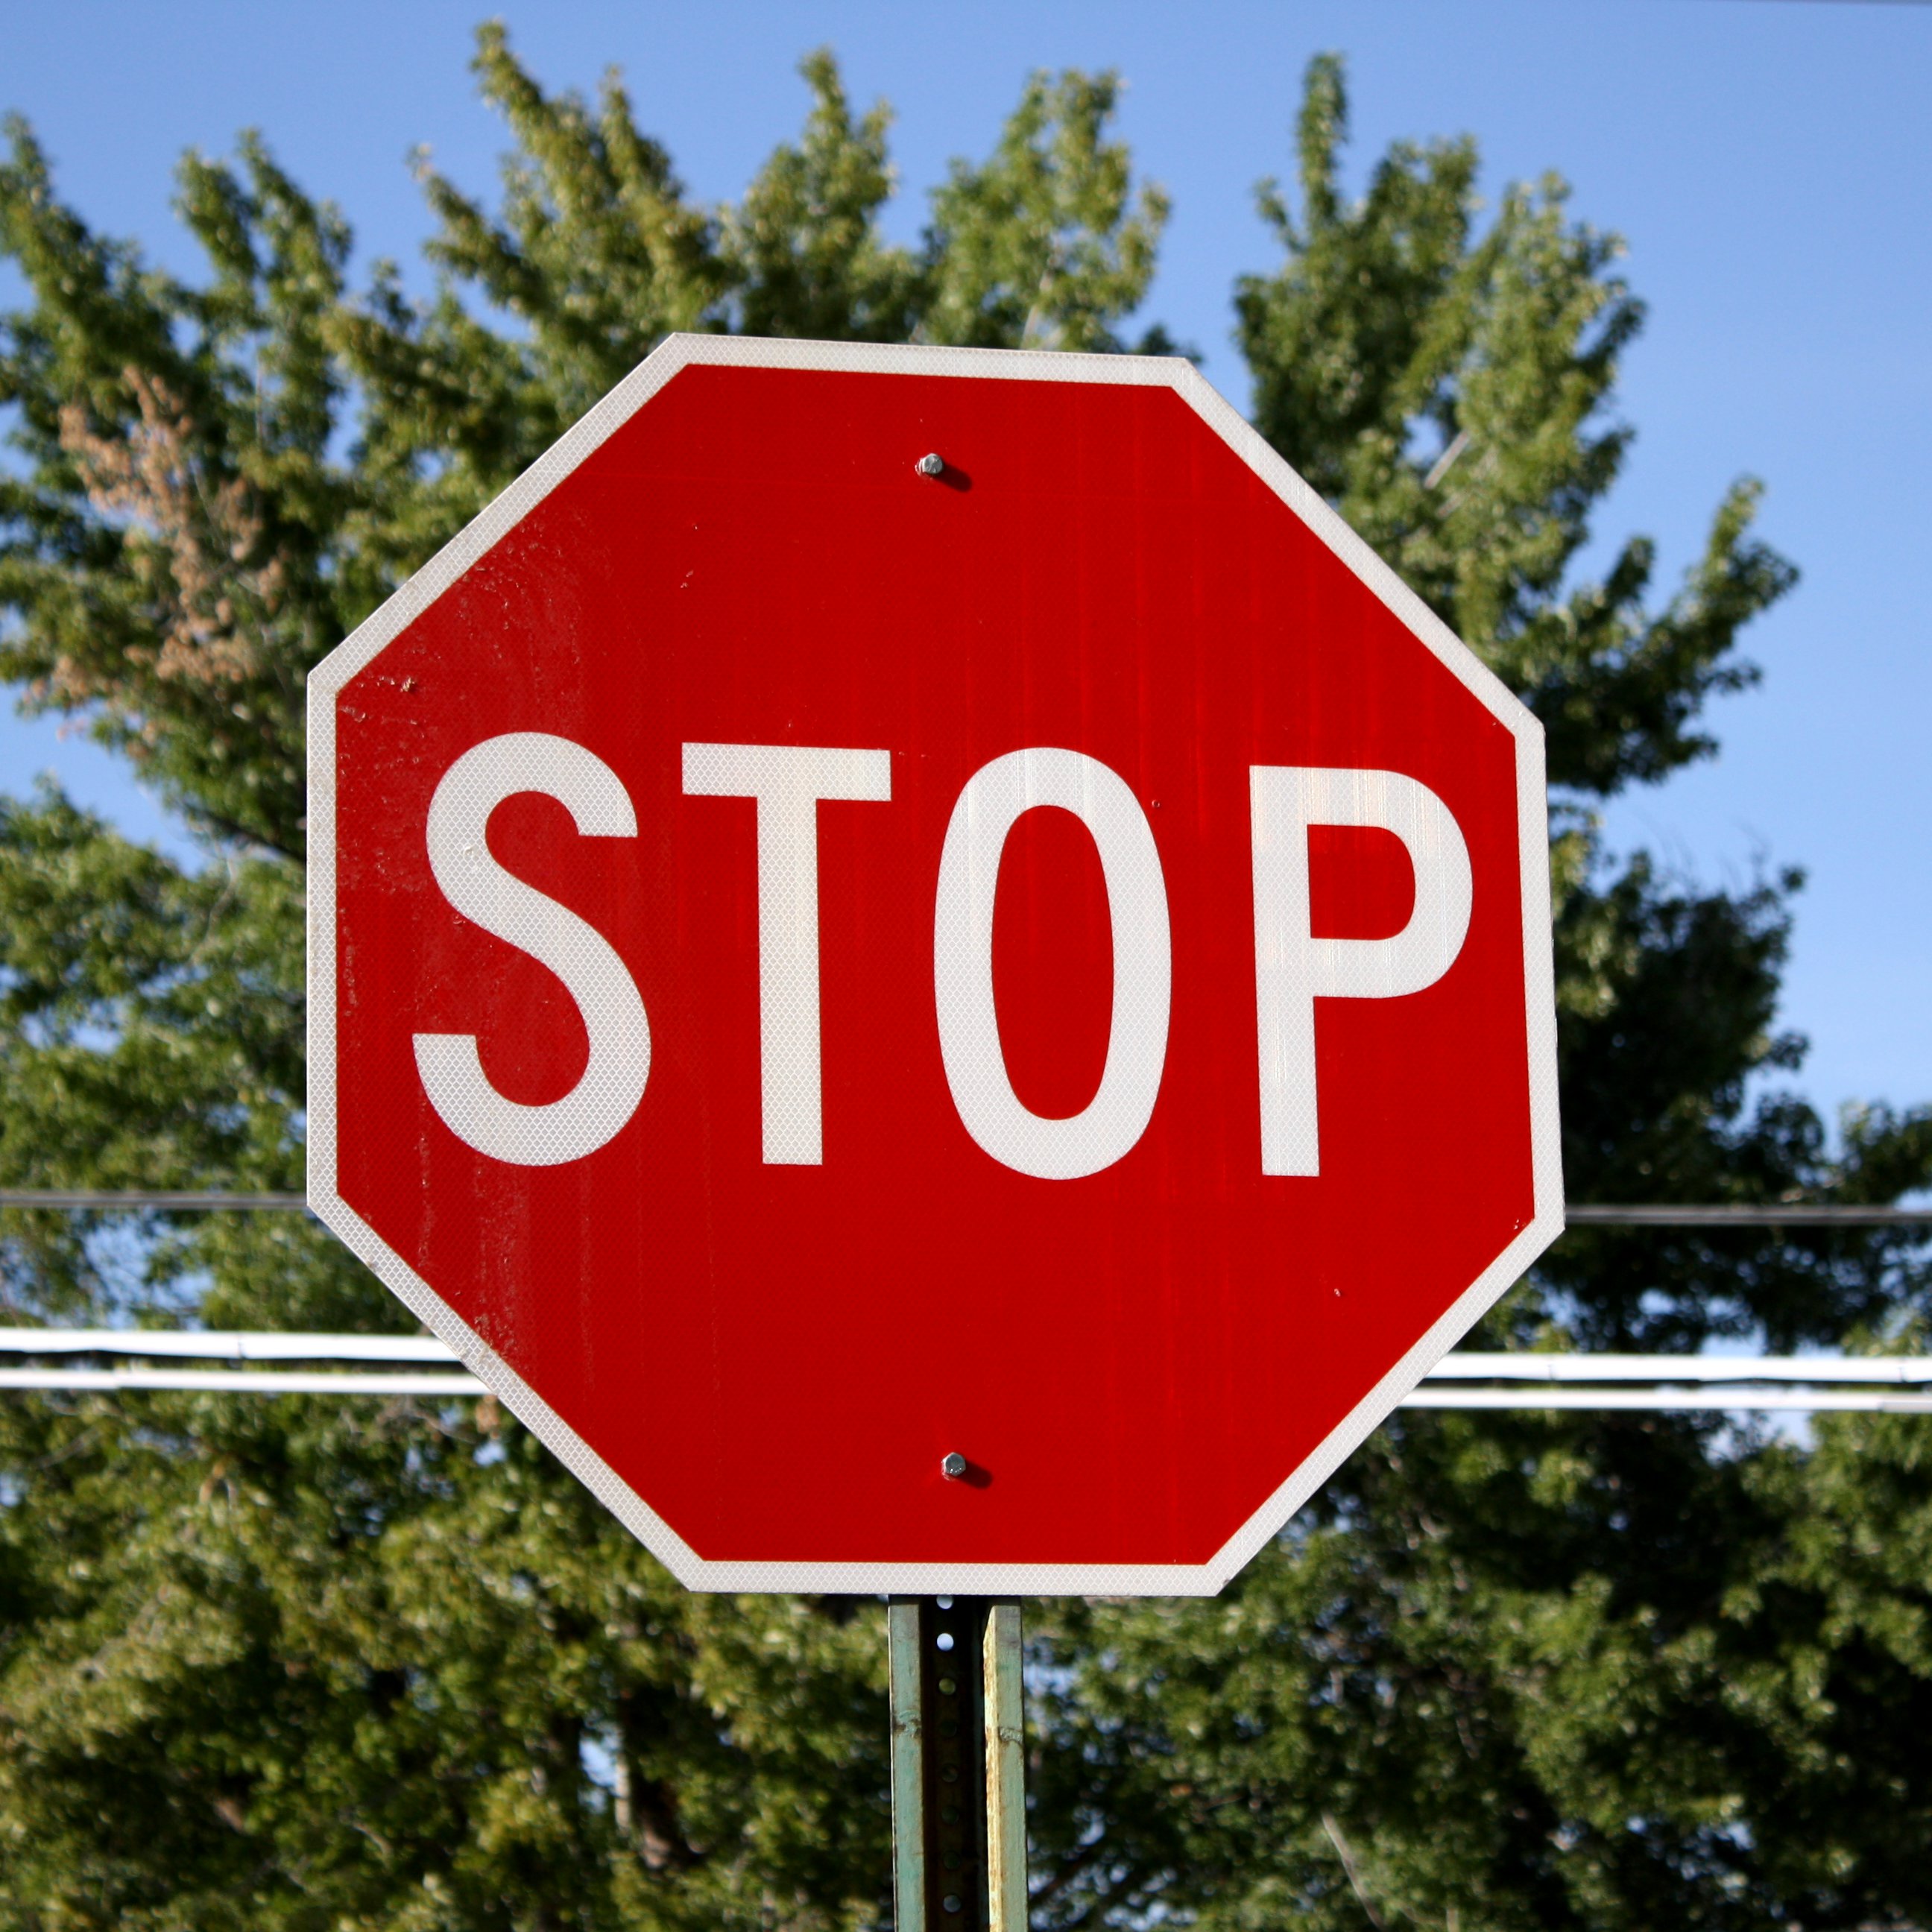 To stop or not to stop? To think or not to think? | Along The ...